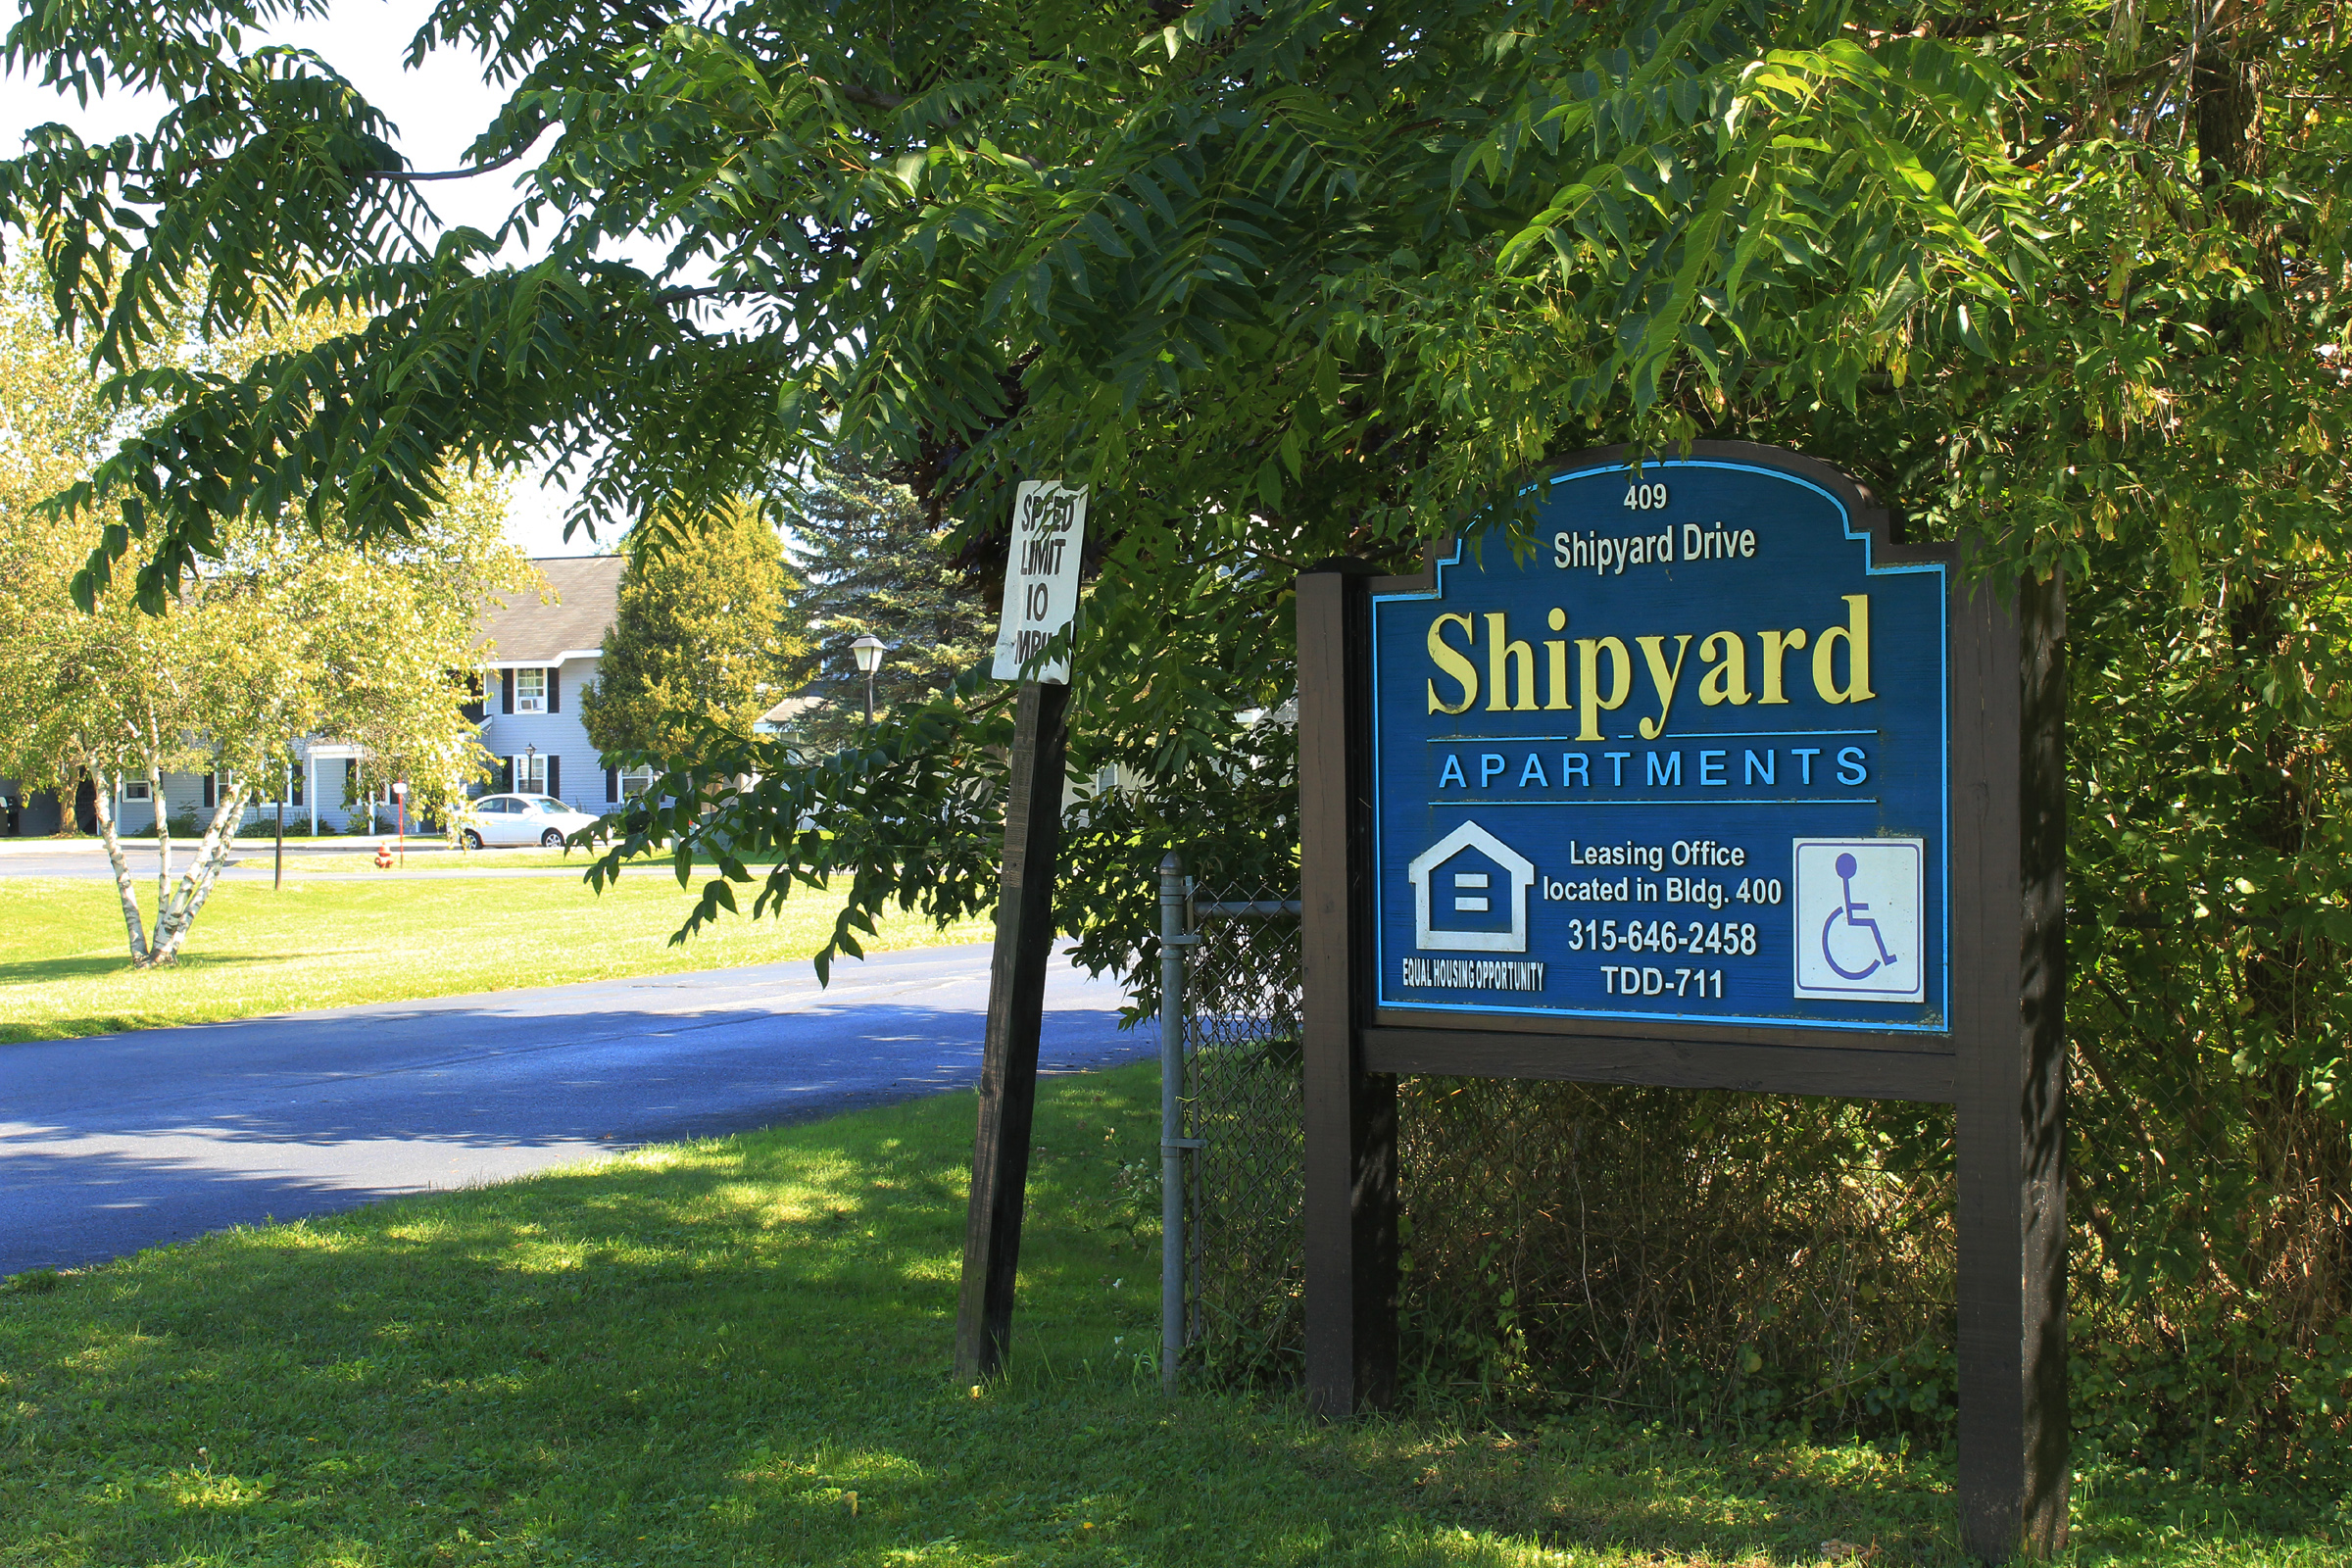 property management company client list syracuse ny welcome image of shipyard apartments